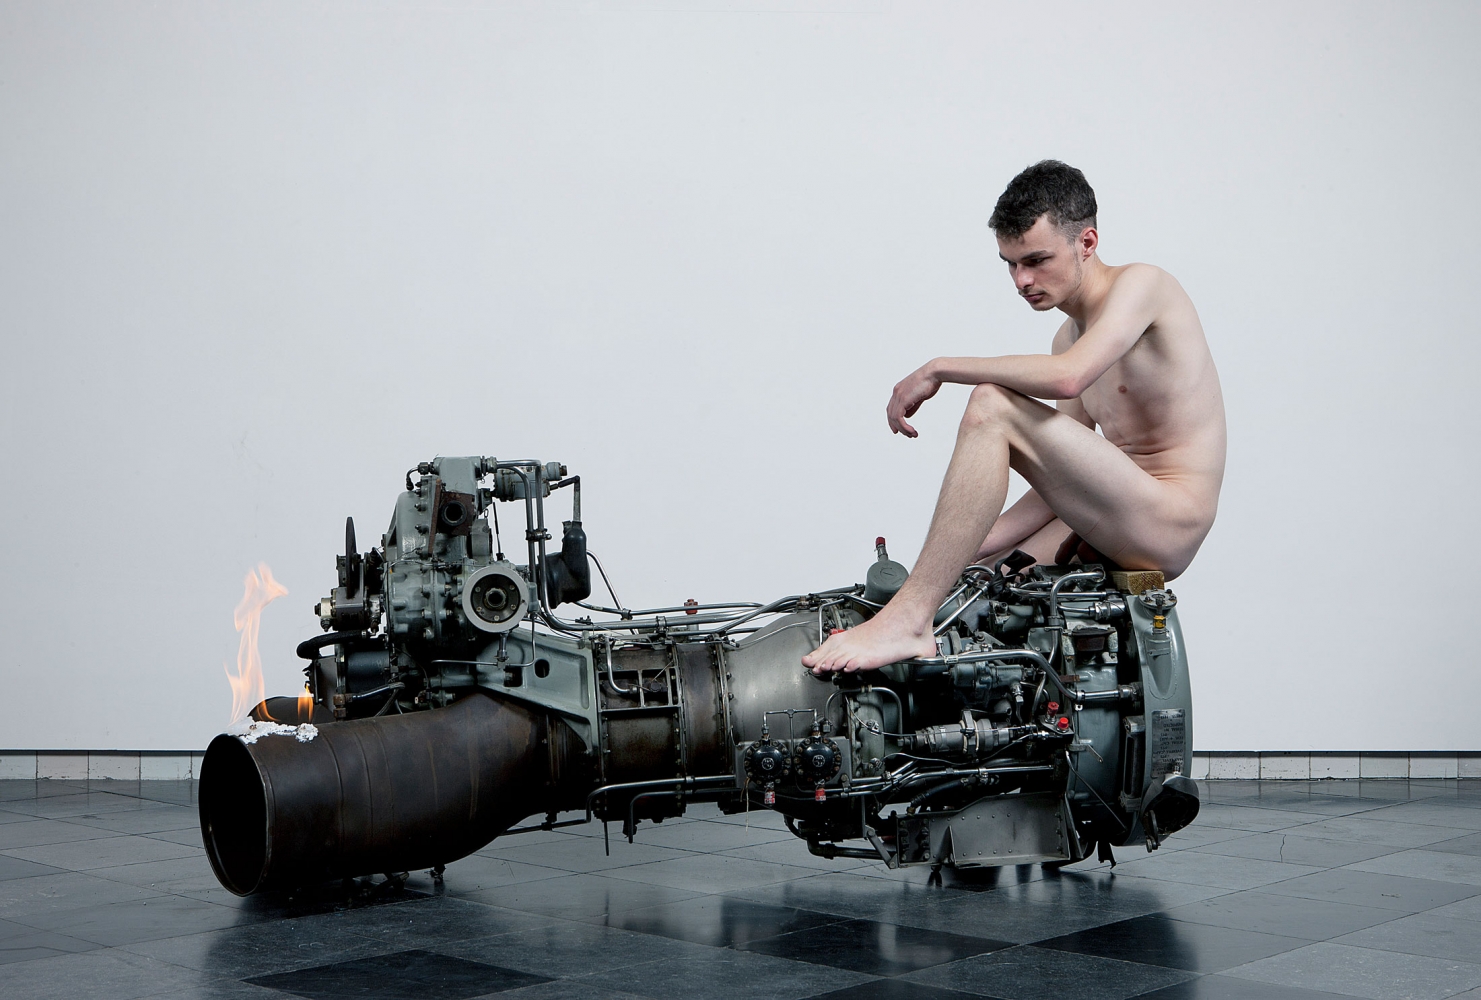 Roger Hiorns
Untitled, 2011
Military aircraft engine, fire, youth
Dimensions variable
Installation view
De Hallen Haarlem, Haarlem
December 1, 2012 &amp;ndash; February 24, 2013